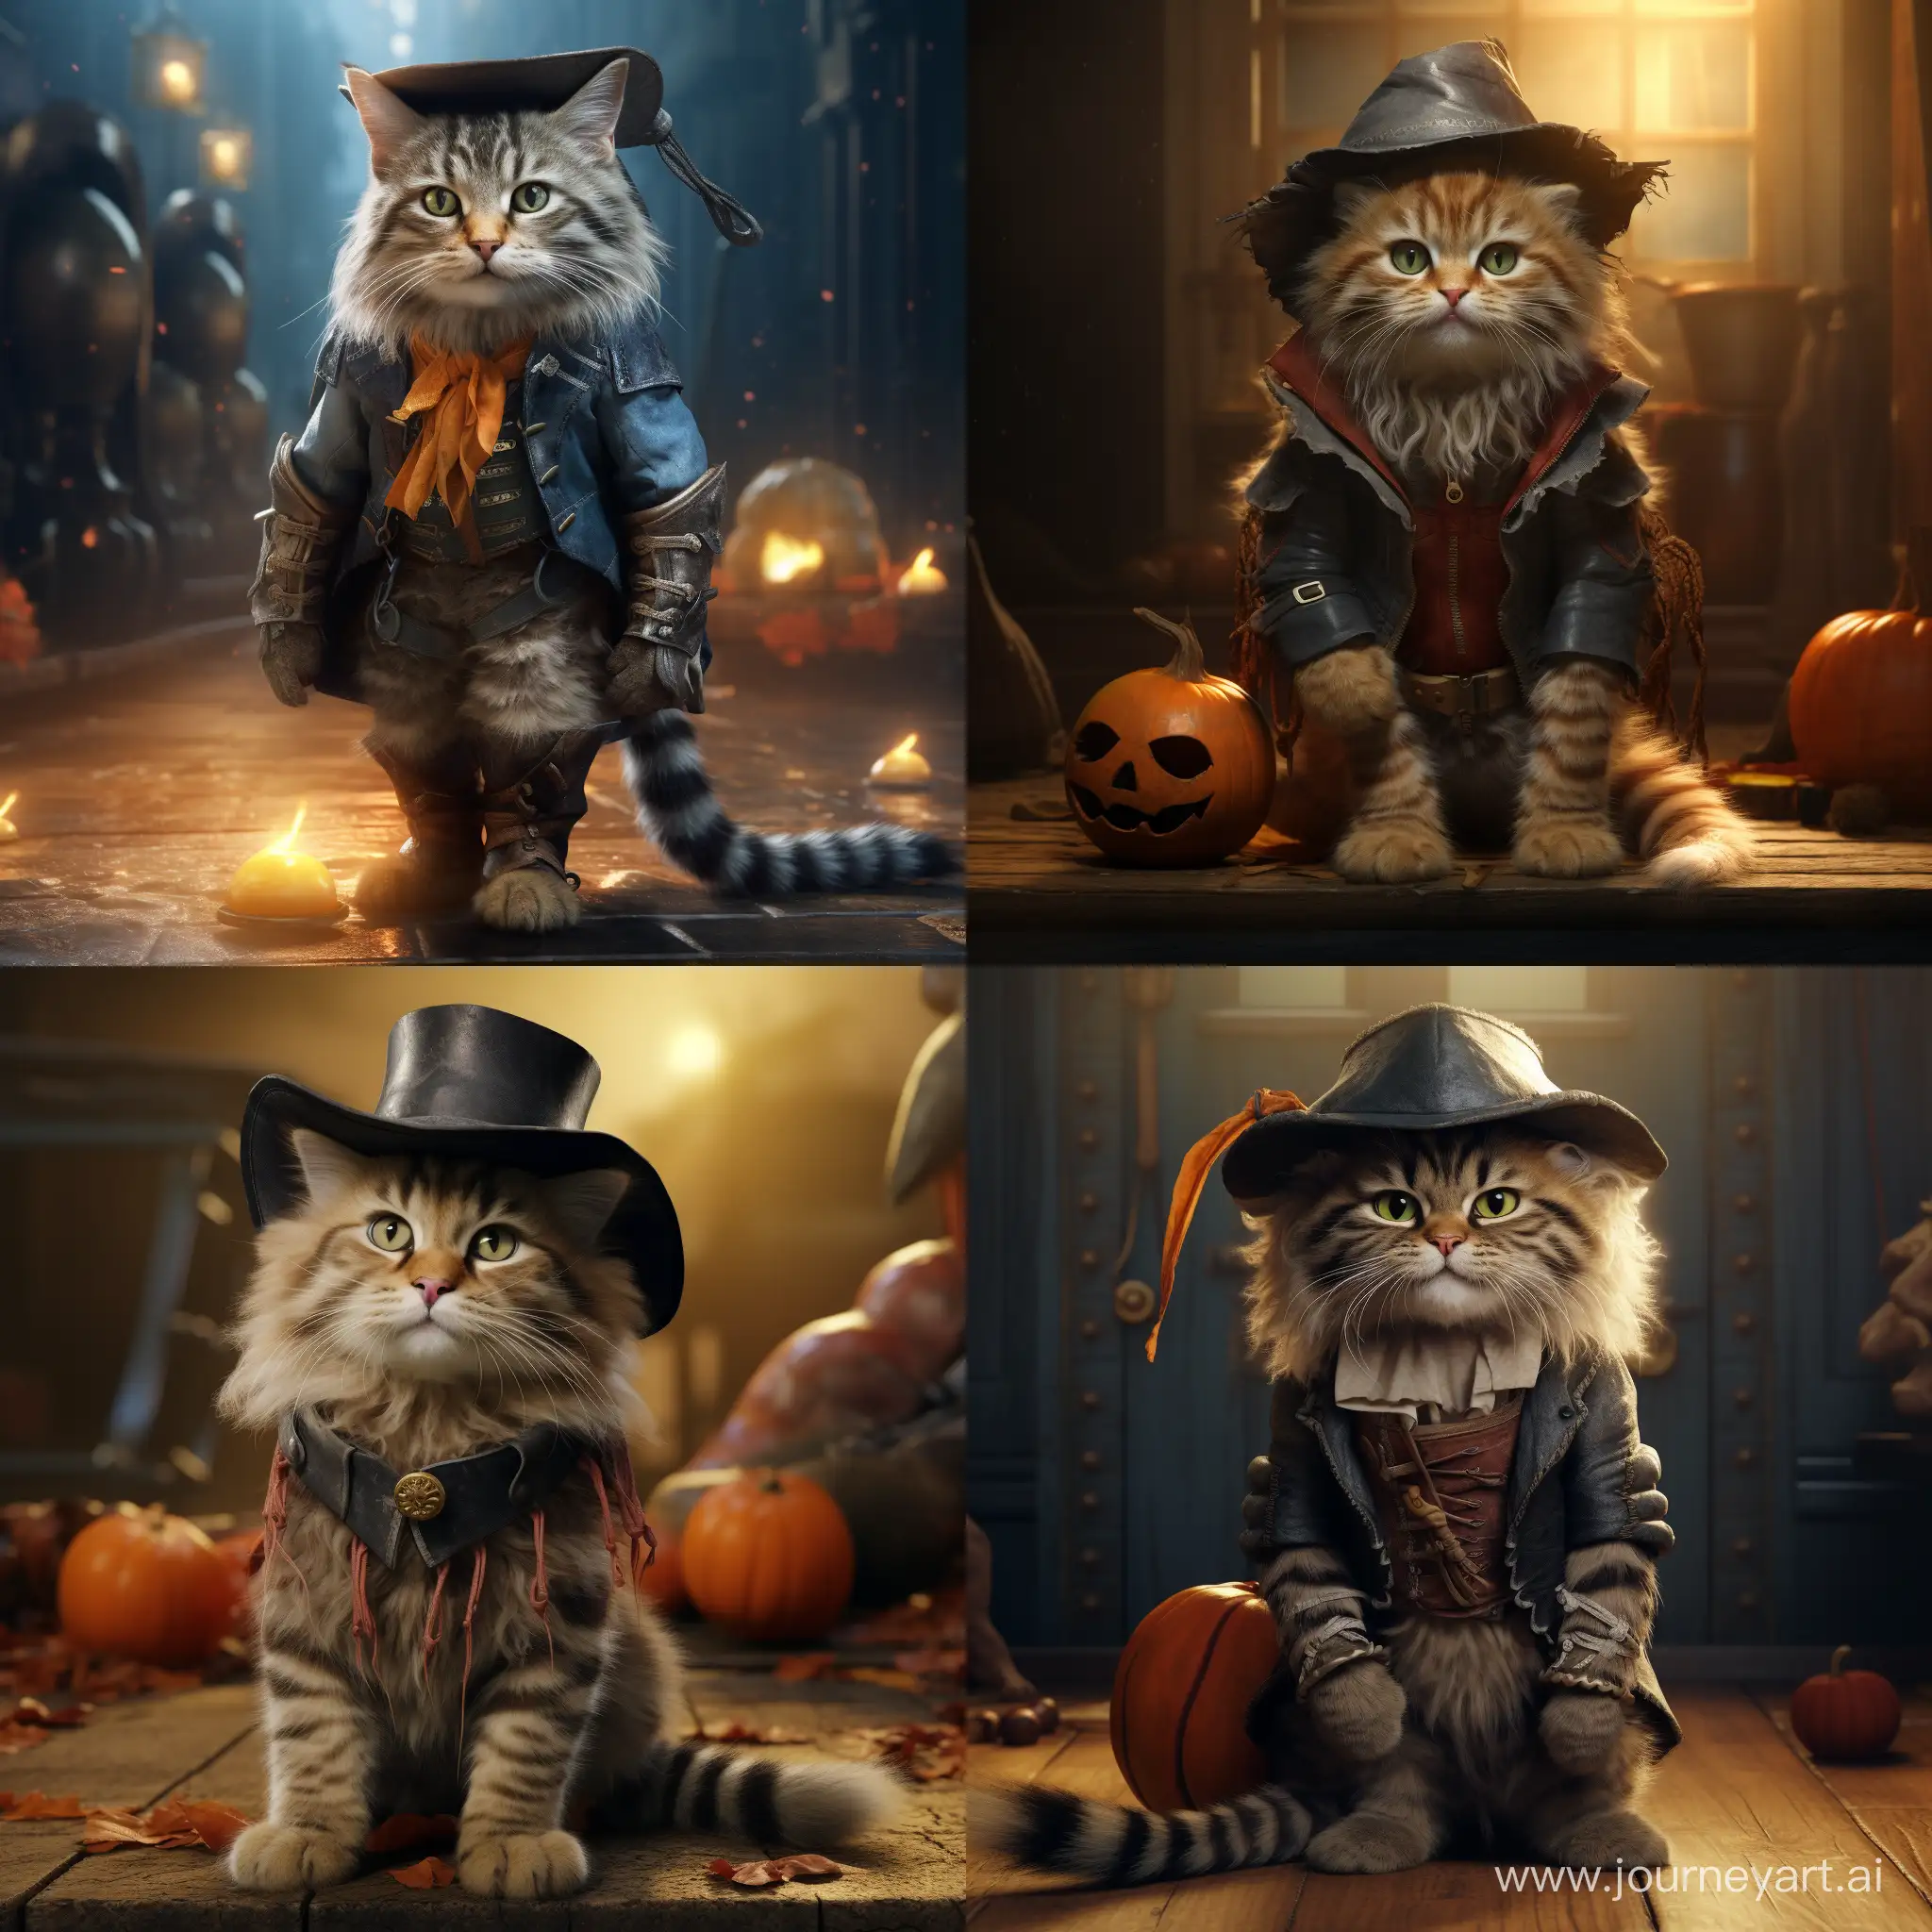 KindFaced-Puss-in-Boots-Celebrates-Halloween-in-Realistic-UHD-4K-Image